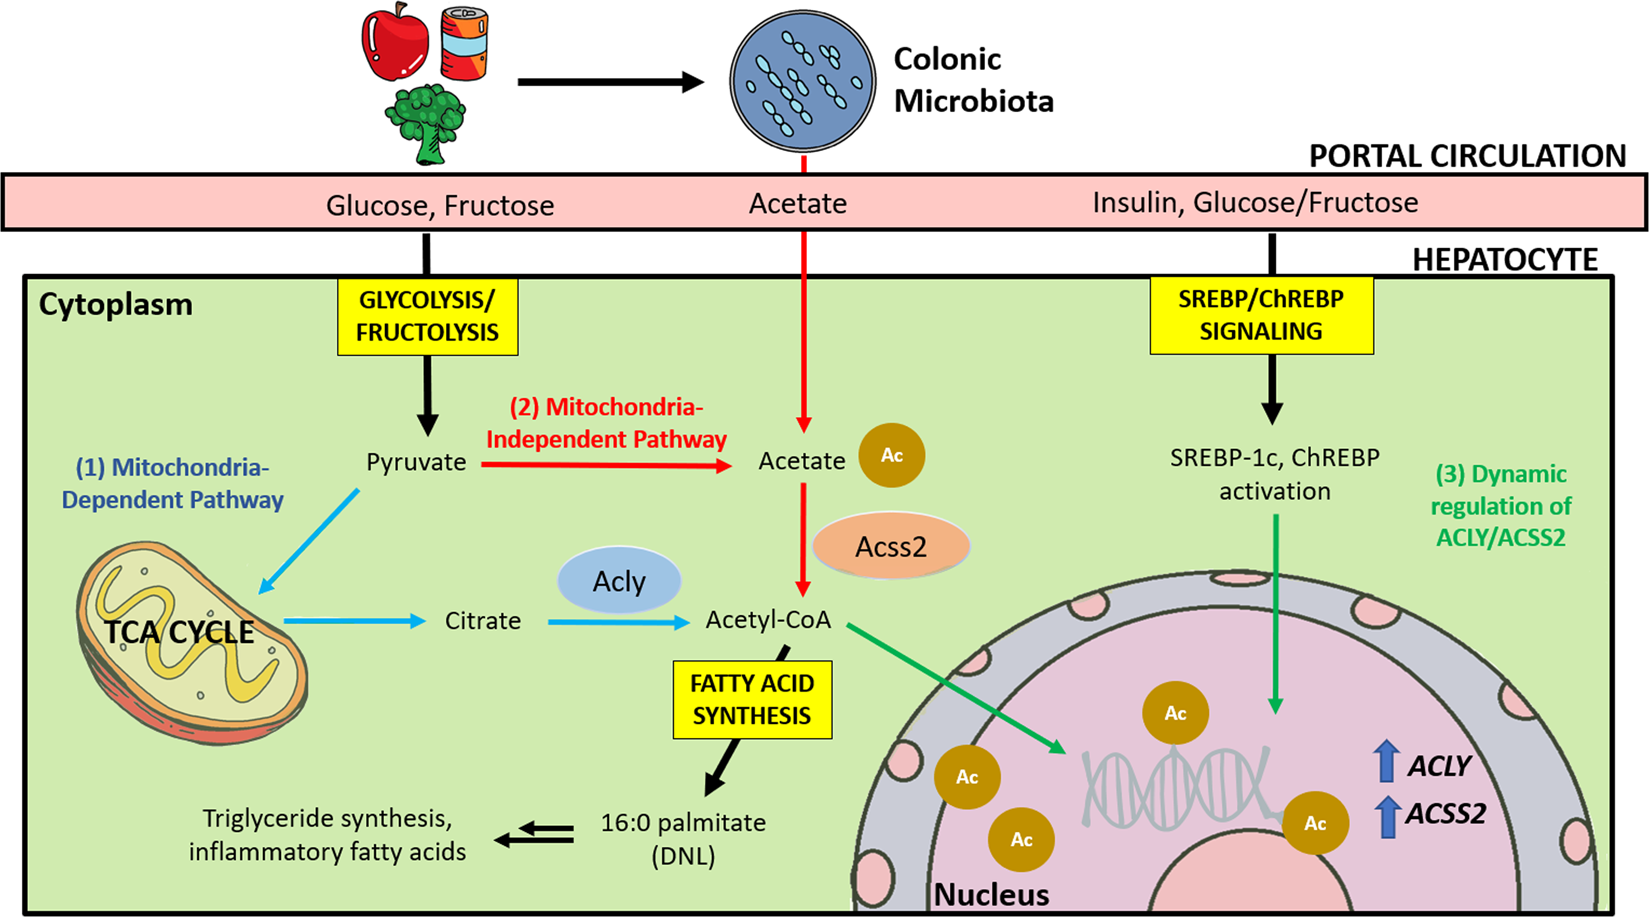 Frontiers  Fructose: A Dietary Sugar in Crosstalk with Microbiota  Contributing to the Development and Progression of Non-Alcoholic Liver  Disease